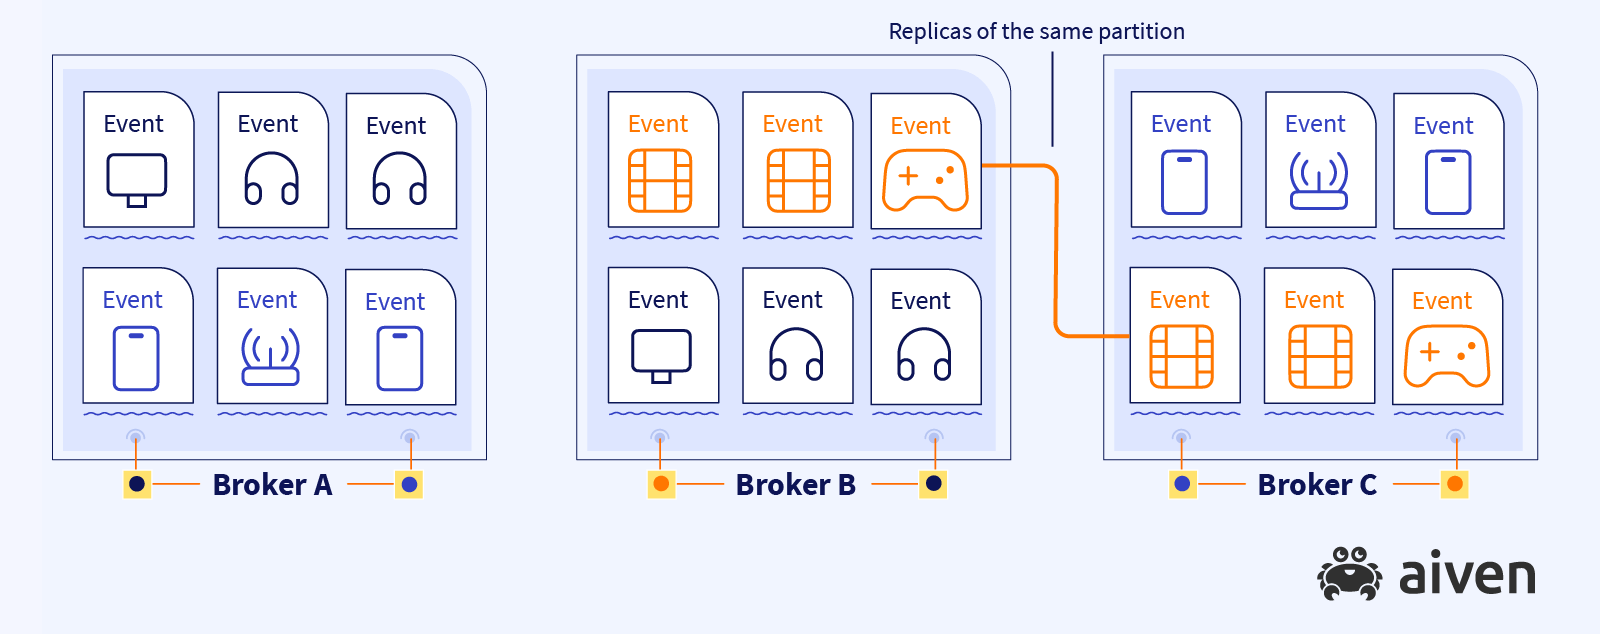 There are 3 brokers, A, B and C. Each has 2 partitions. The content of the partitions is different, except that Broker B and Broker C replicate one partition - the events in the replicated partition are the same in both brokers